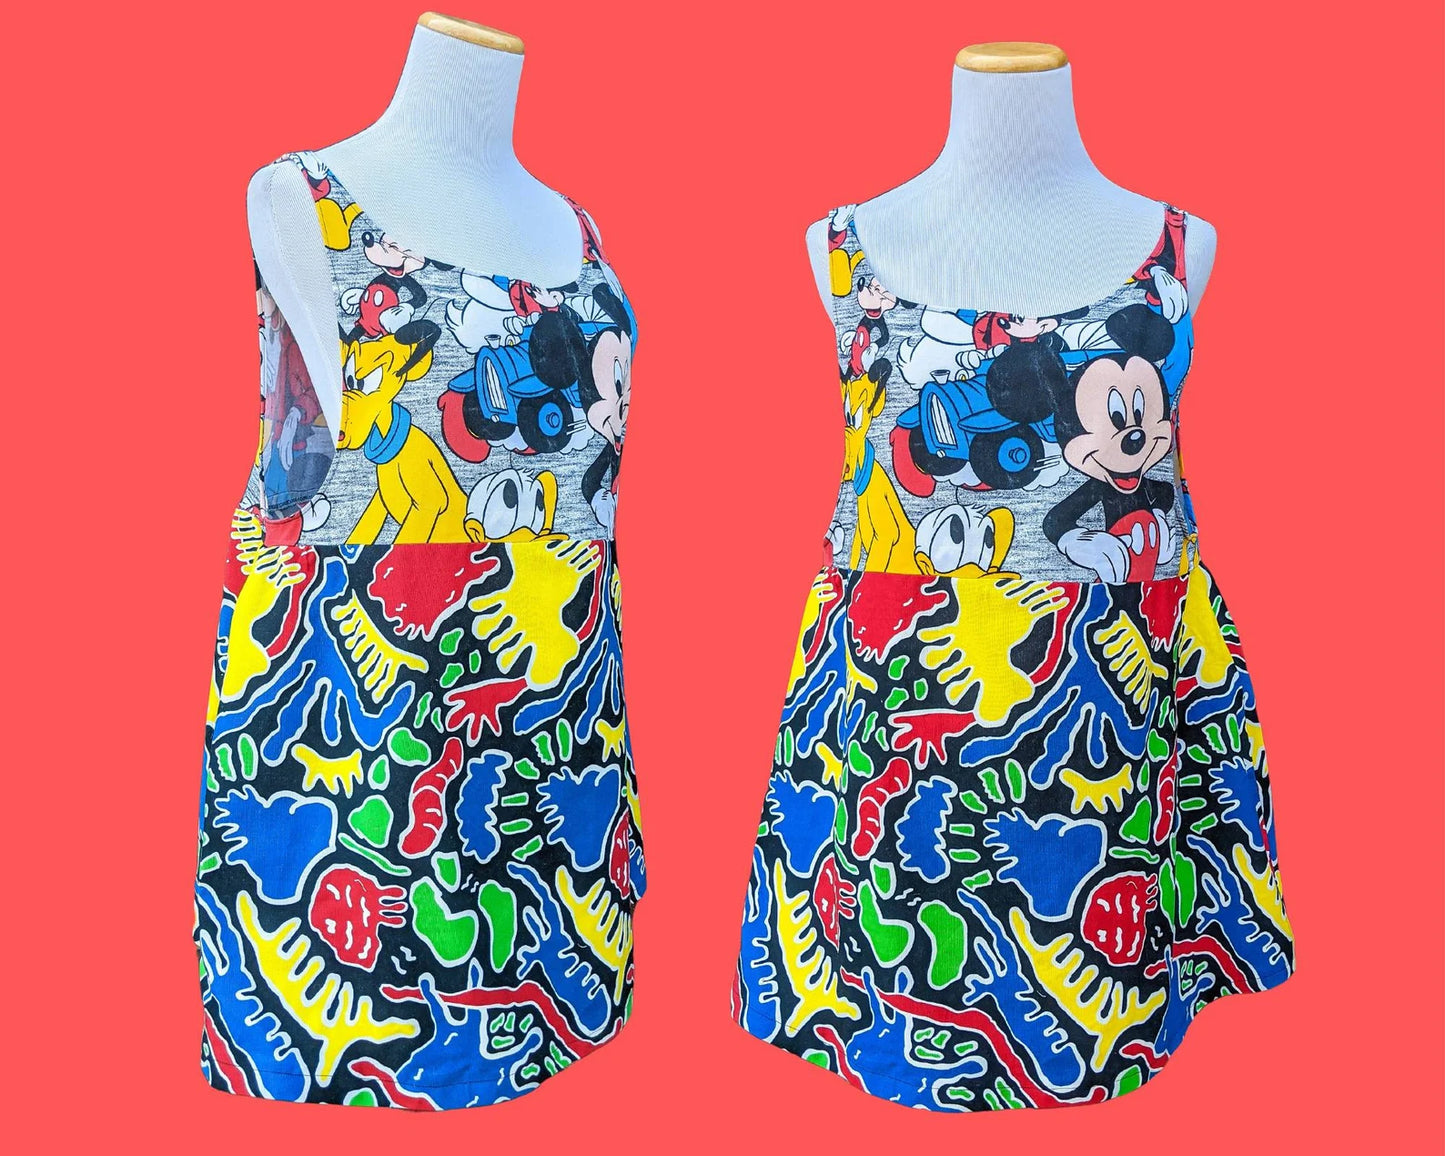 Handmade, Upcycled Mickey Mouse & The Gang Dress, Vintage 1990's Colourful Skirt Size M